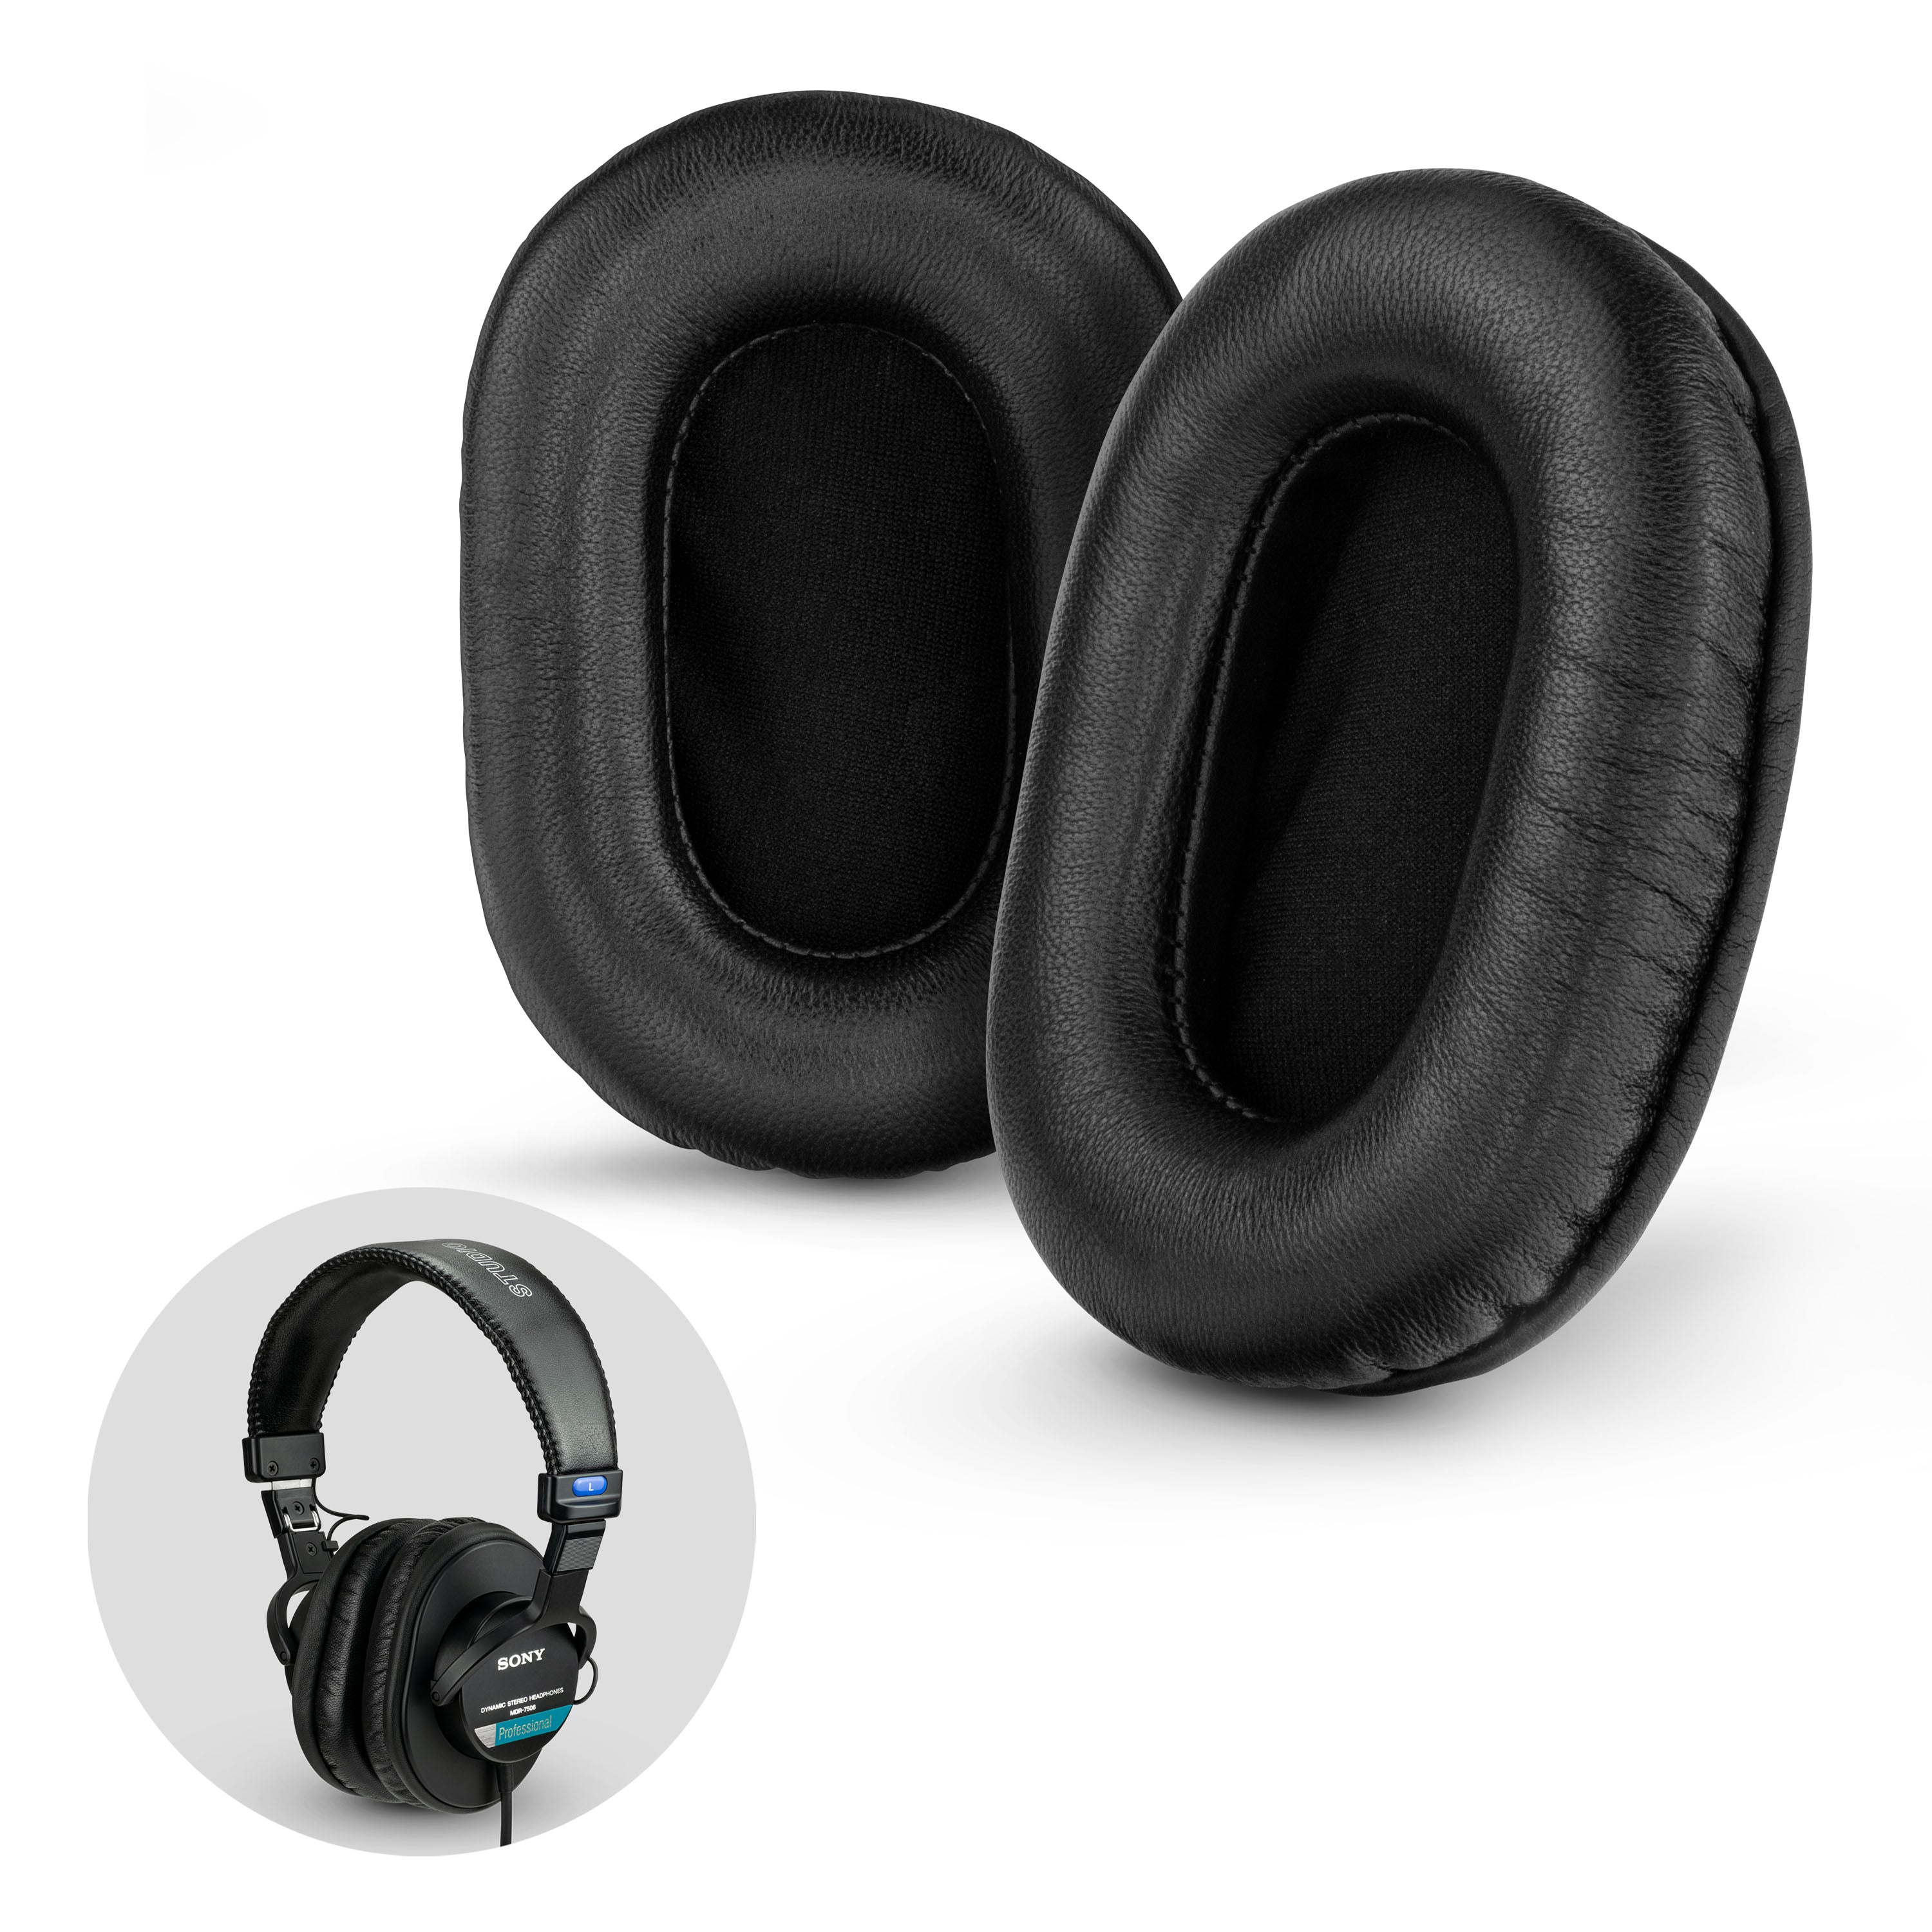 SONY MDR-7506 SHEEPSKIN Leather Replacement Premium Earpads